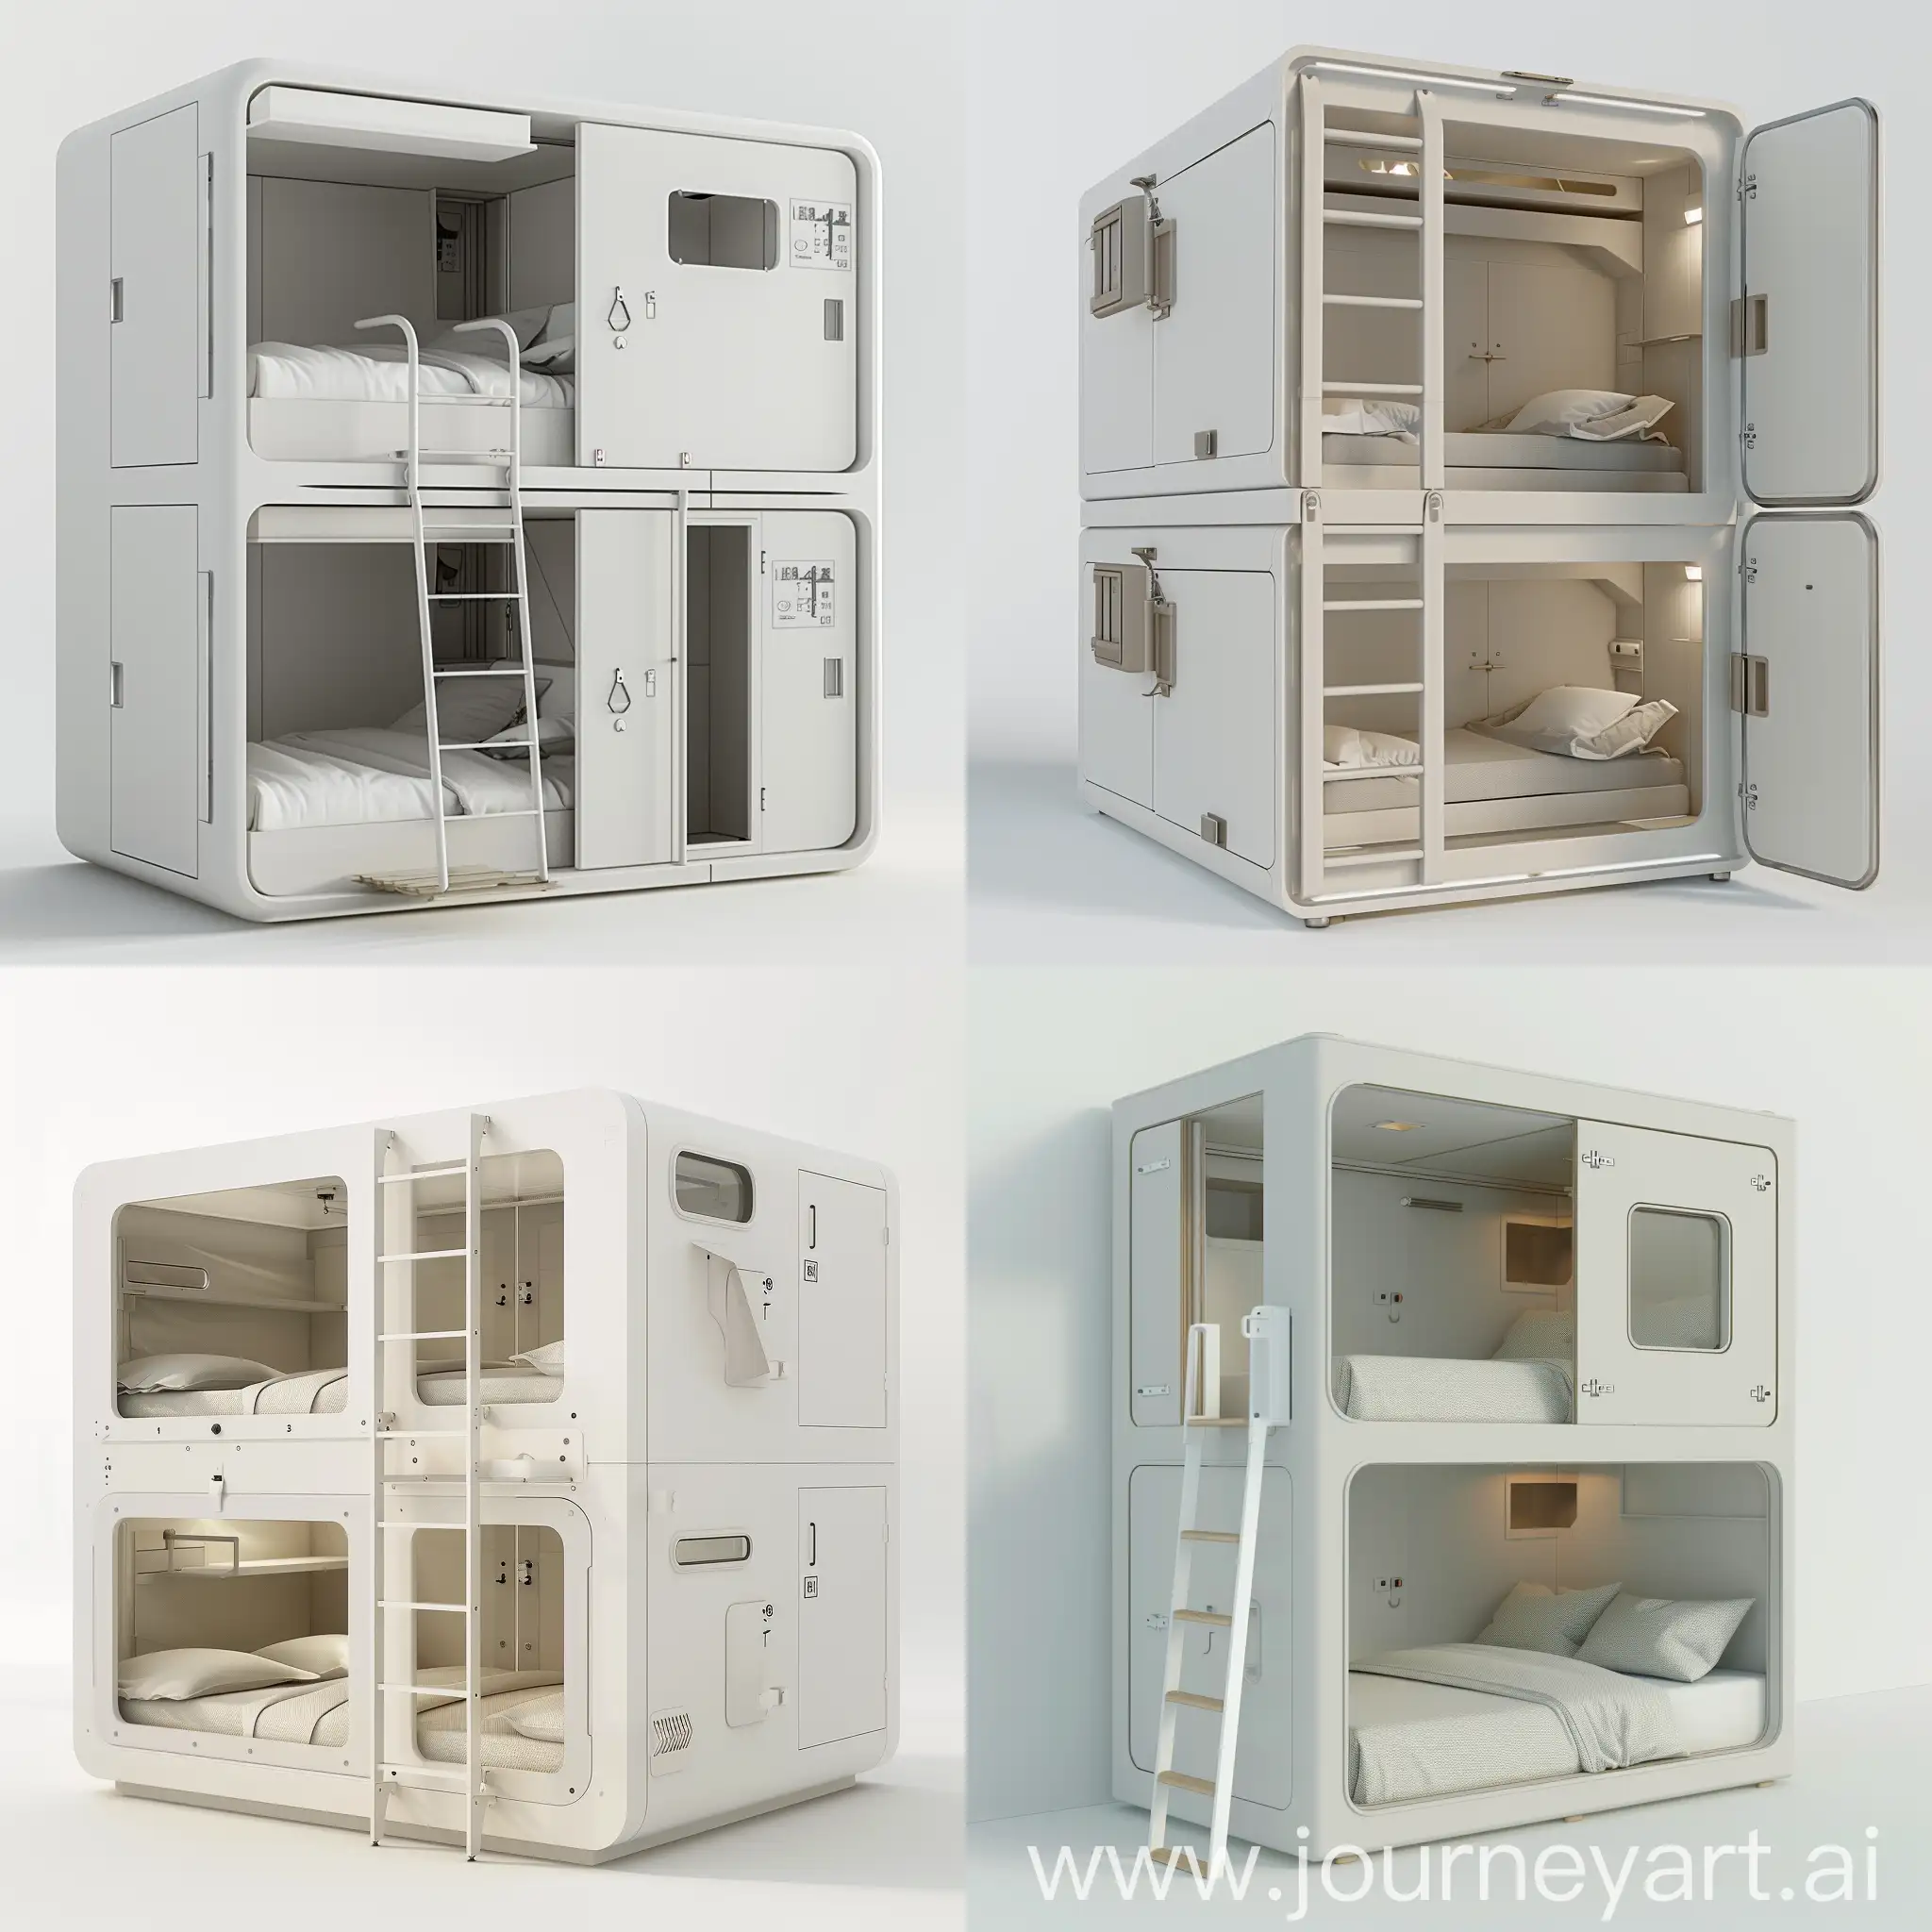 Design of a closed unit from all sides in a modern style Like a Japanese capsule hotel
. It contains  2 beds loft , bed and a lower bed. A ladder connects to the loft bed. The small side of the unit contains a door that closes and opens. It is made of white wood. The unit dimensions are 2 meters long and 1.5 meters wide. And 3 meters high